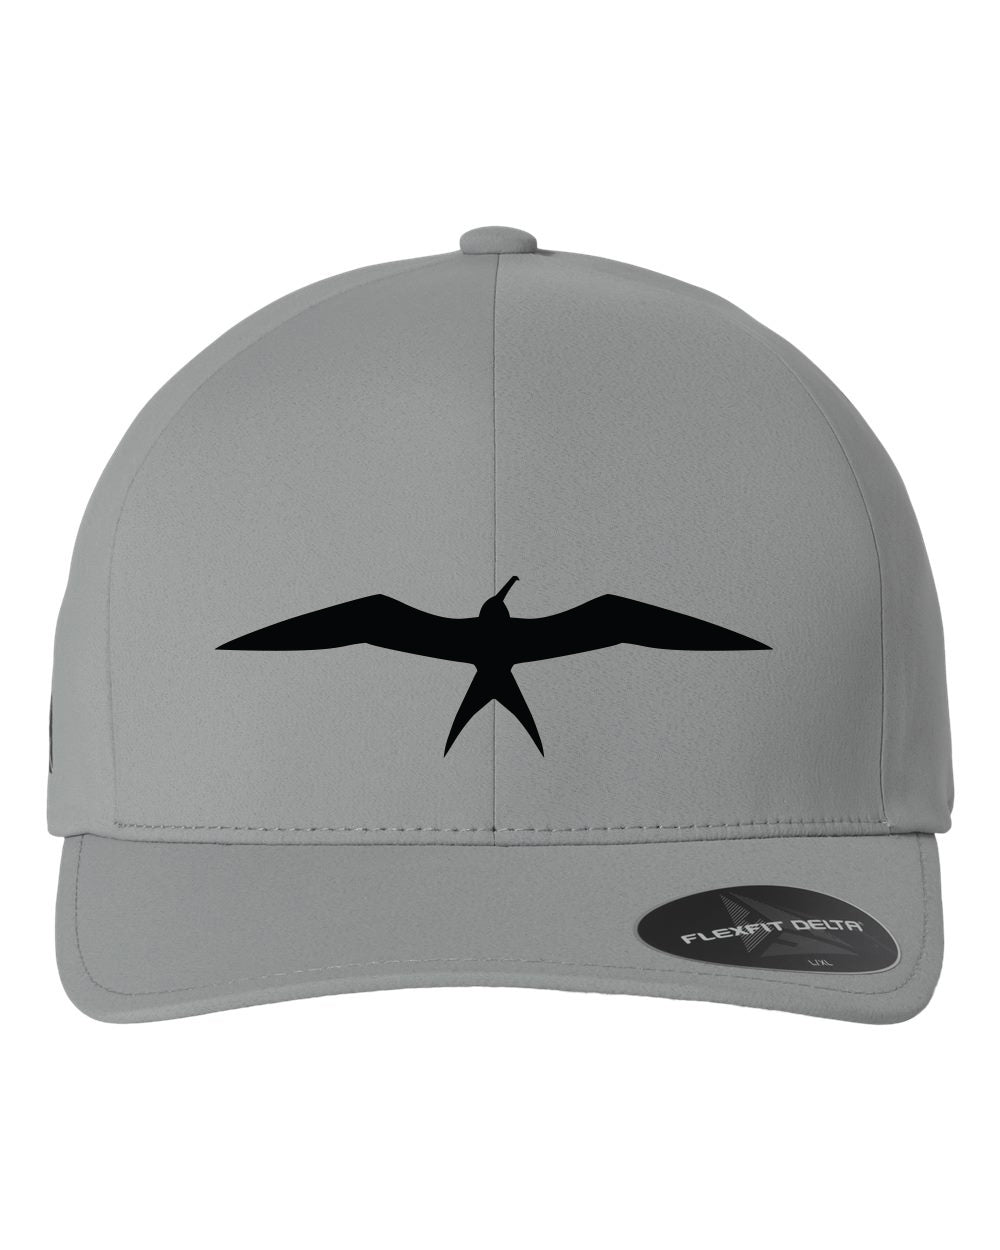 Invincible Silver Delta Flexfit Fitted Hat